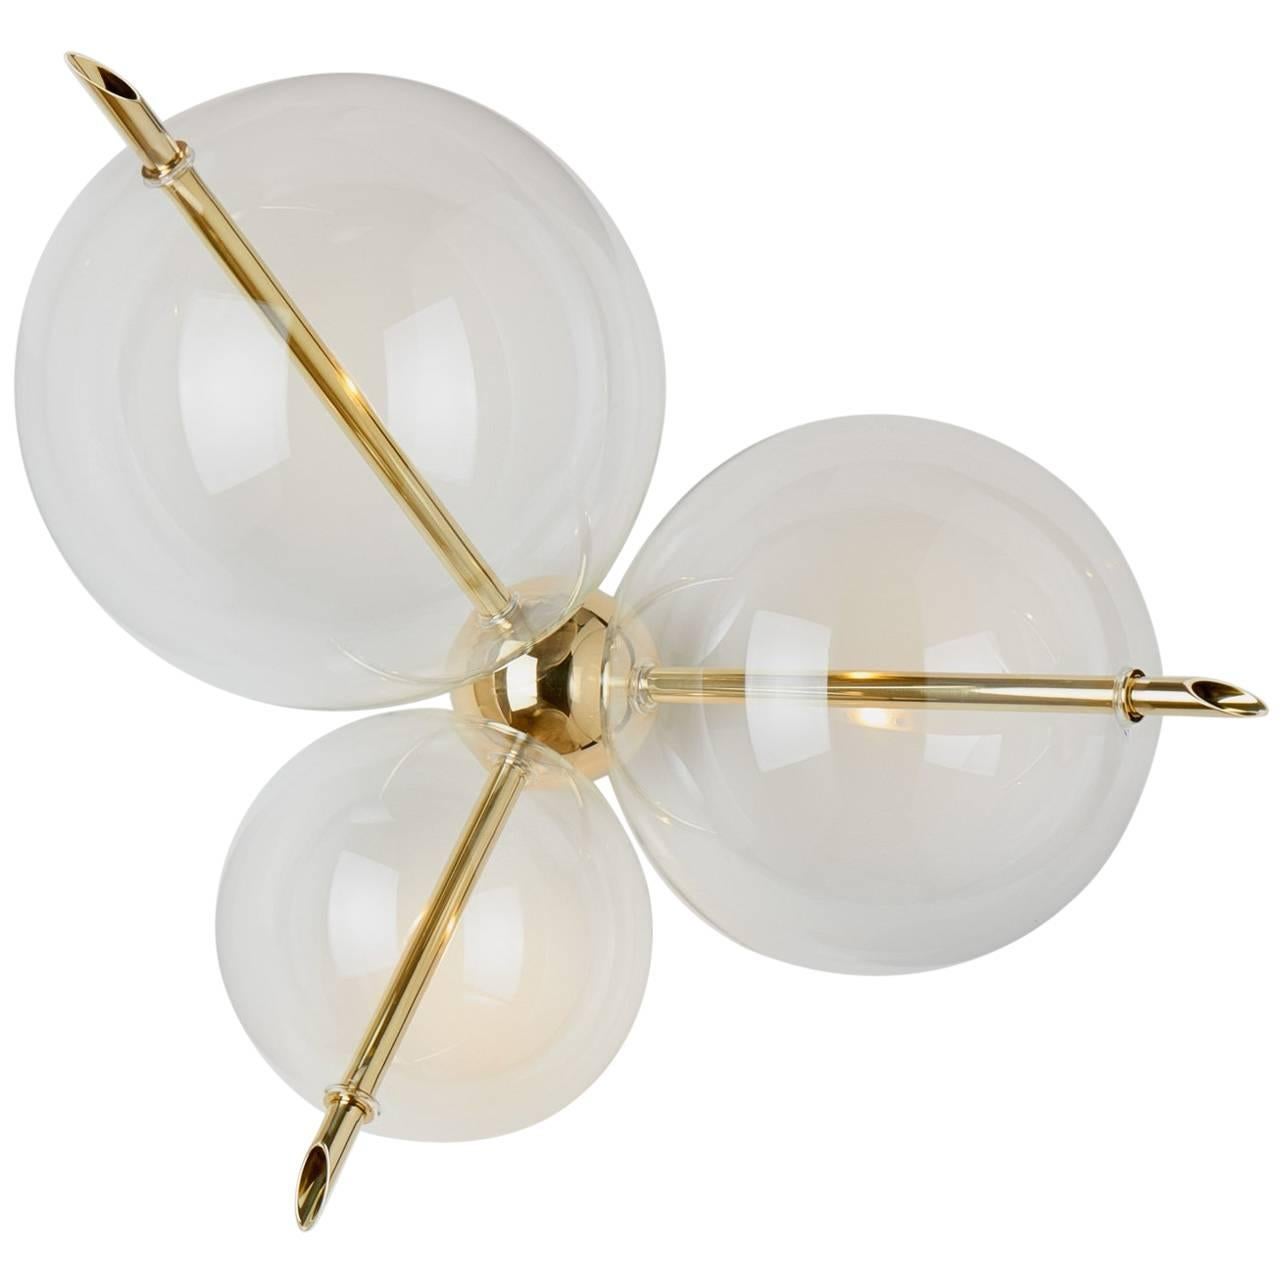 Lune Three lights Contemporary Ceiling Mount / Sconce Polished Brass Blown Glass For Sale